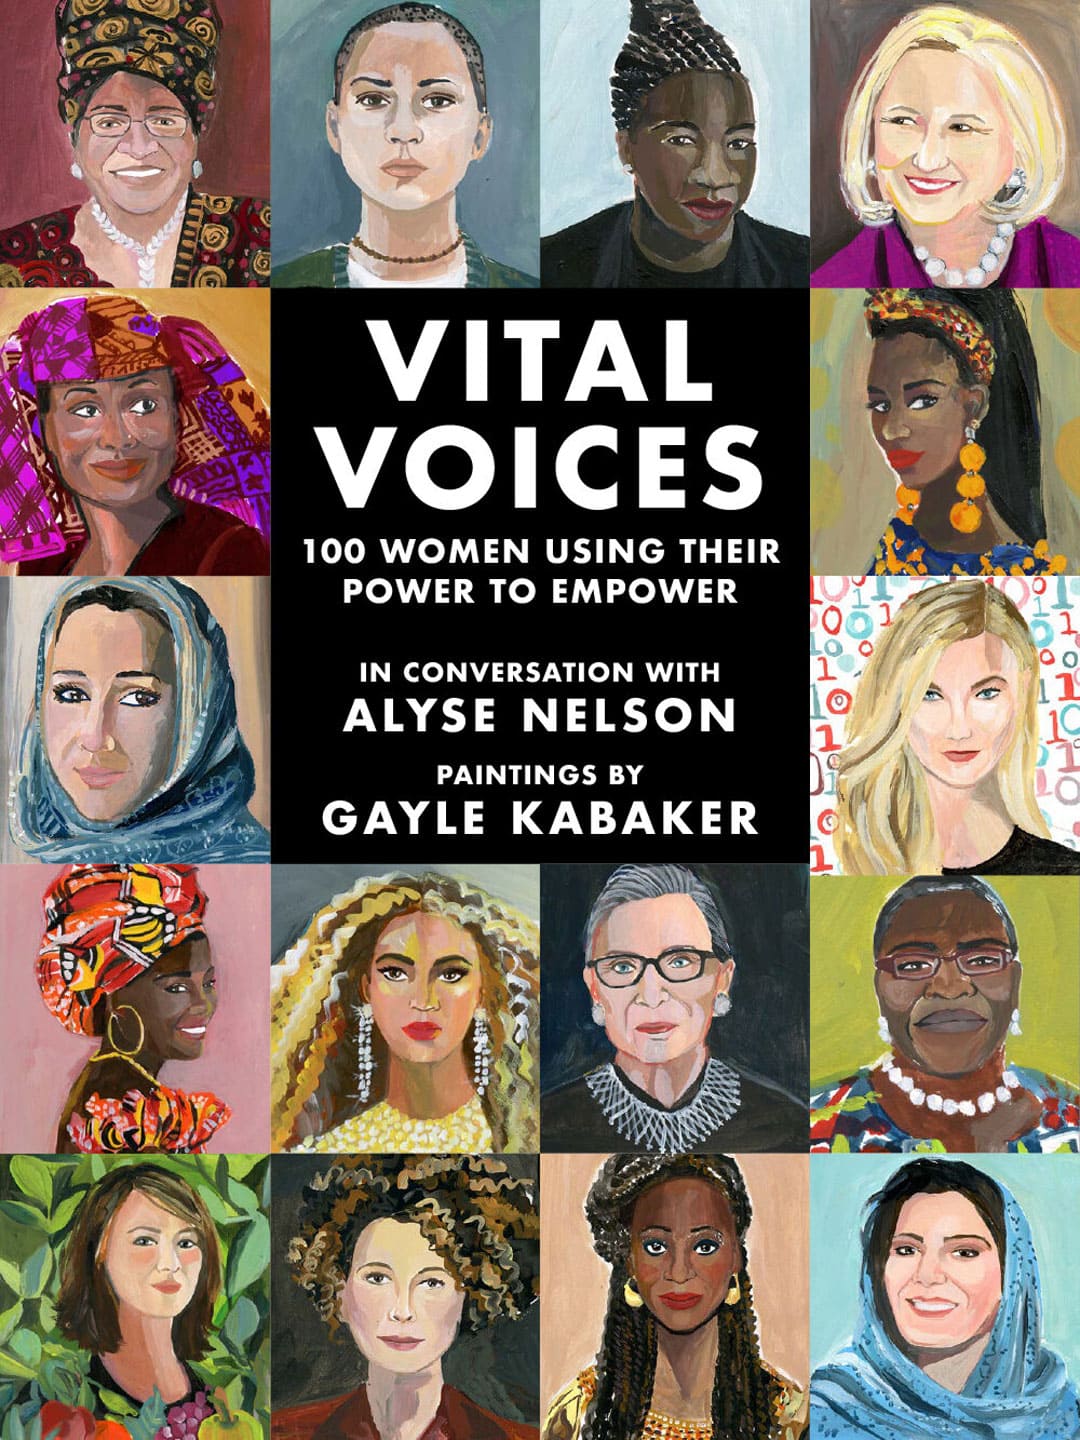 Vital Voices by Gayle Kabaker